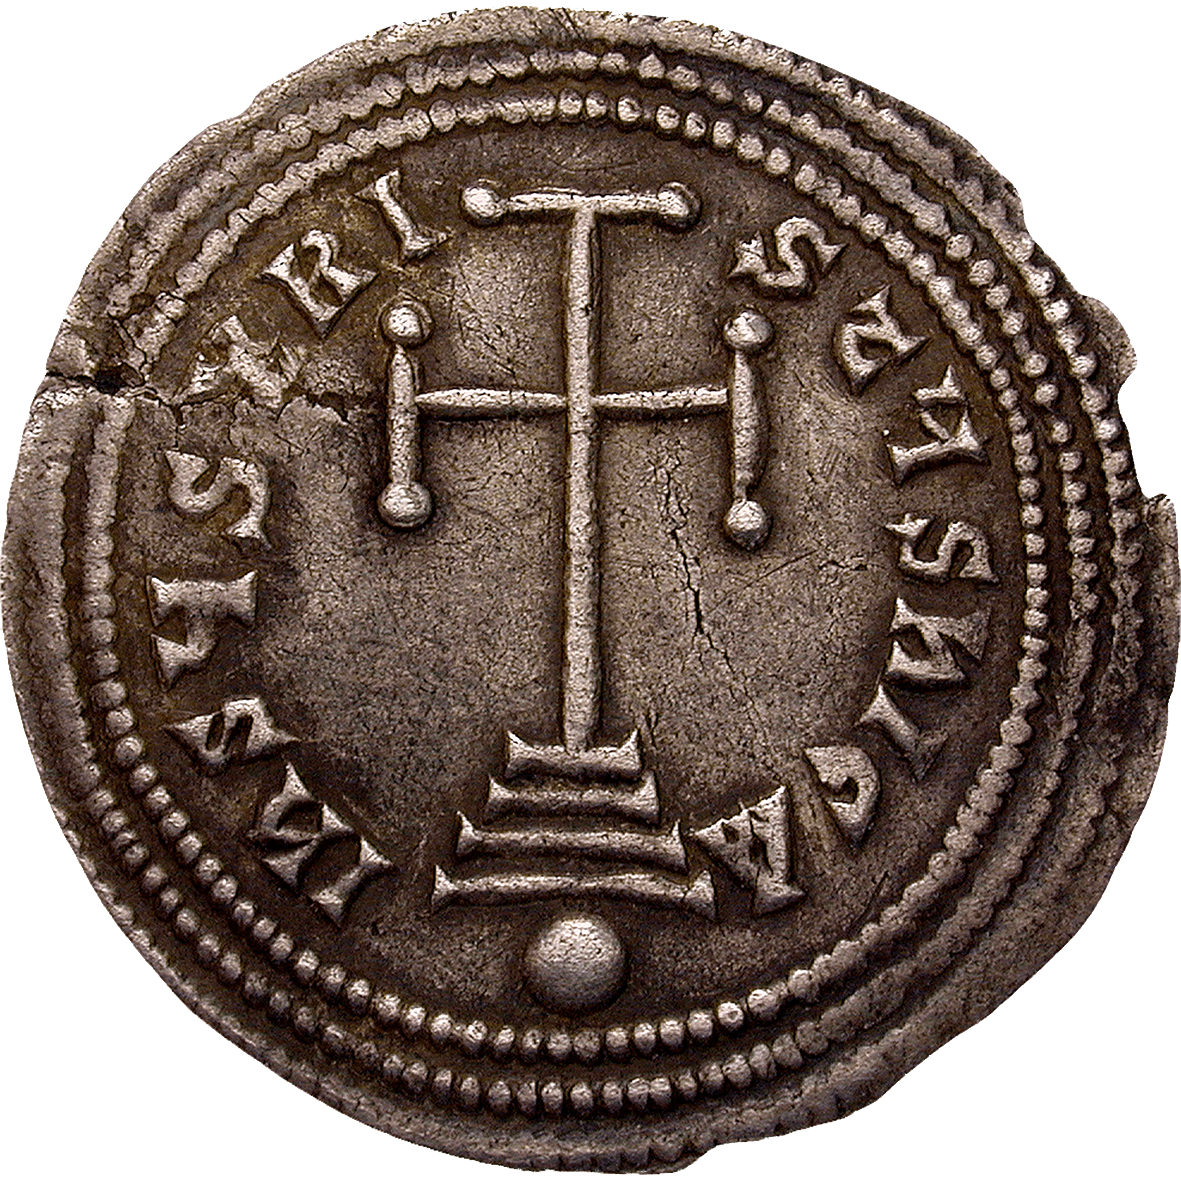 Byzantine Empire, Basil I and Constantine, Miliaresion (obverse)